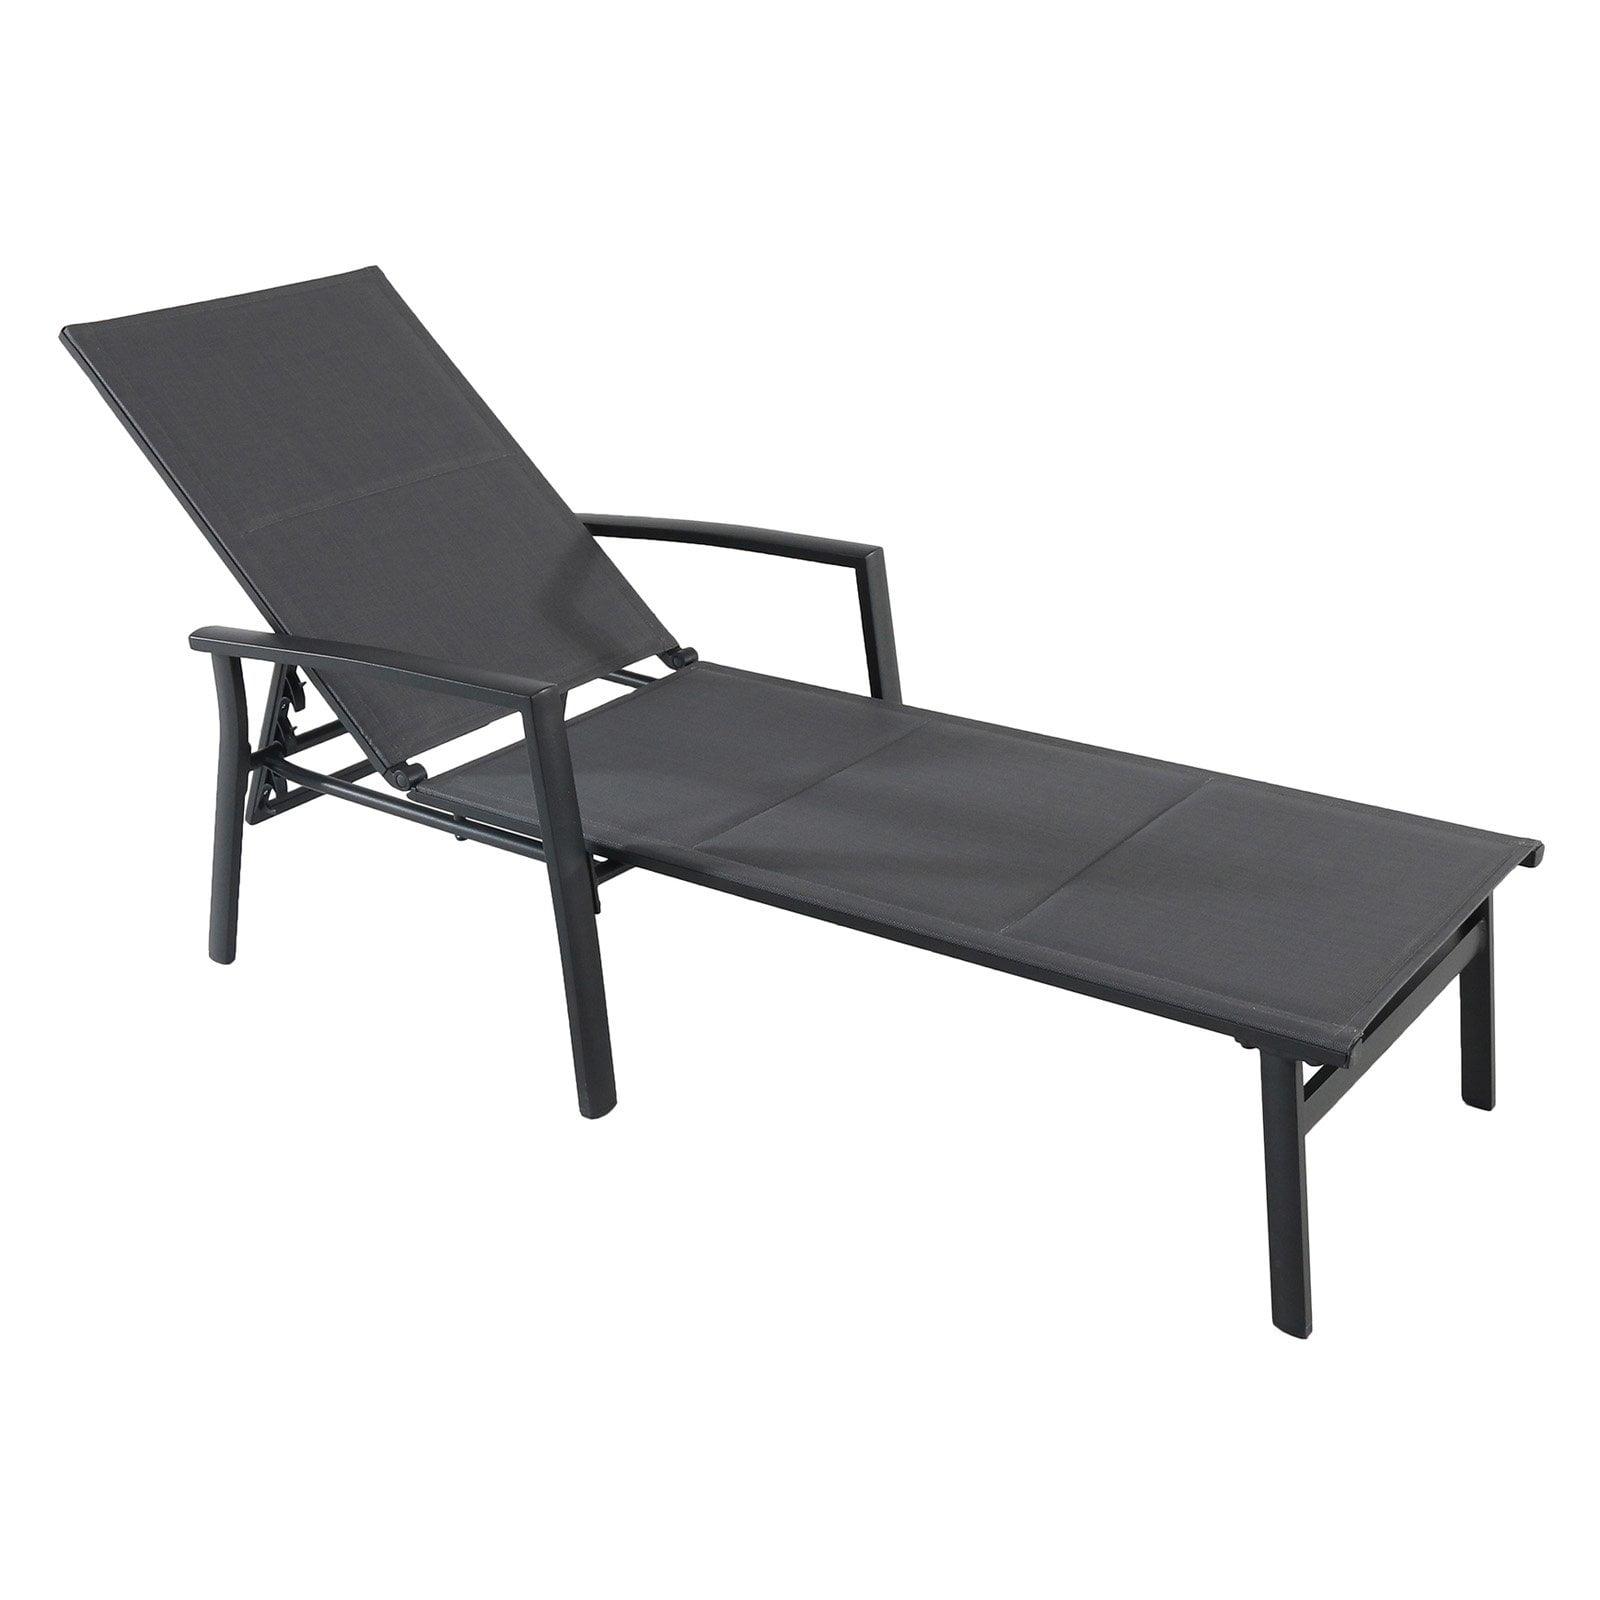 Halsted Deluxe Cool Gray Padded Sling Outdoor Chaise Lounge